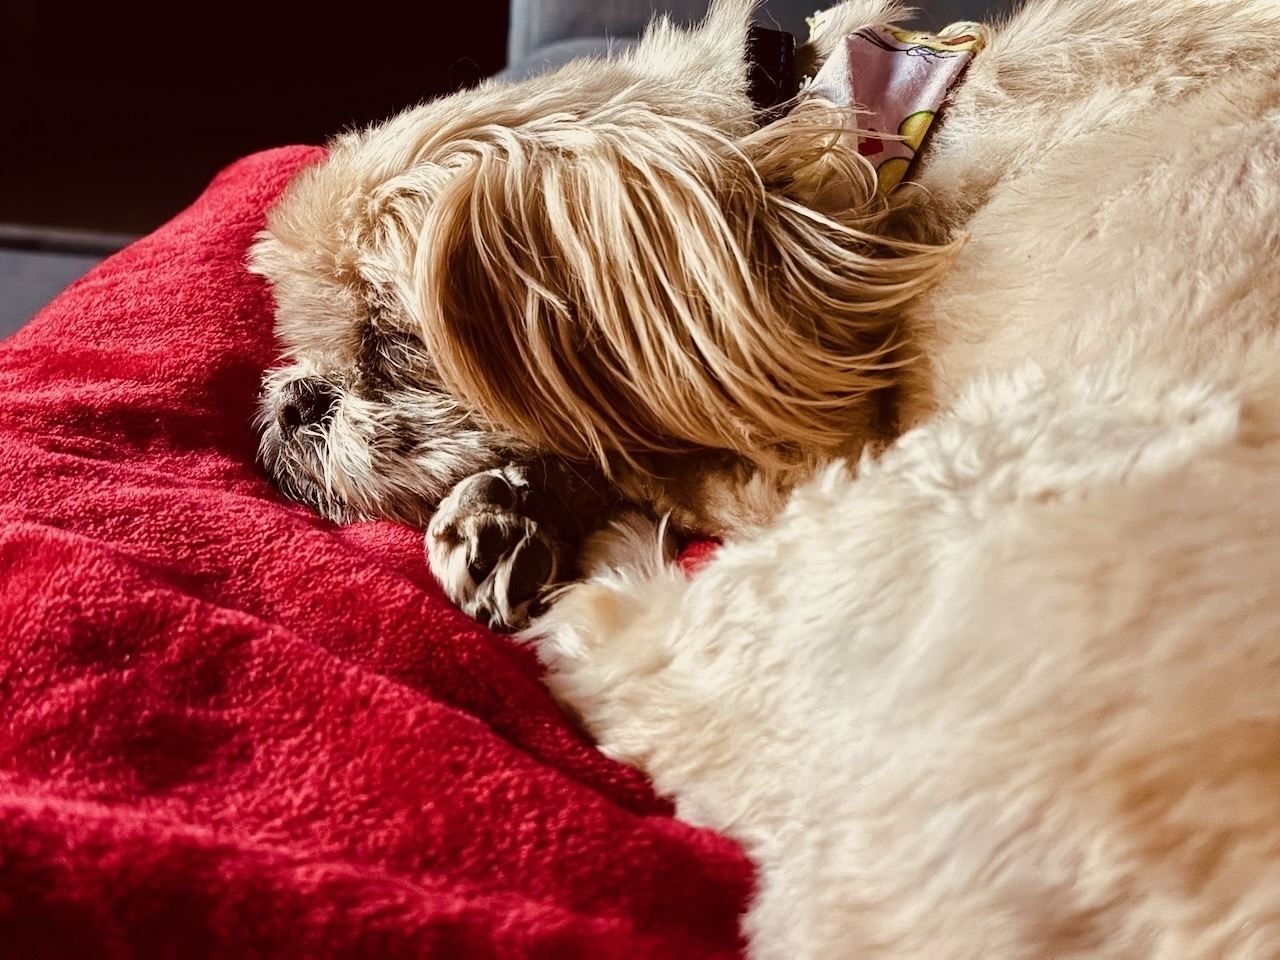 13 year old Lucy, a young shih-tzu at heart, sleeping soundly after a busy day.